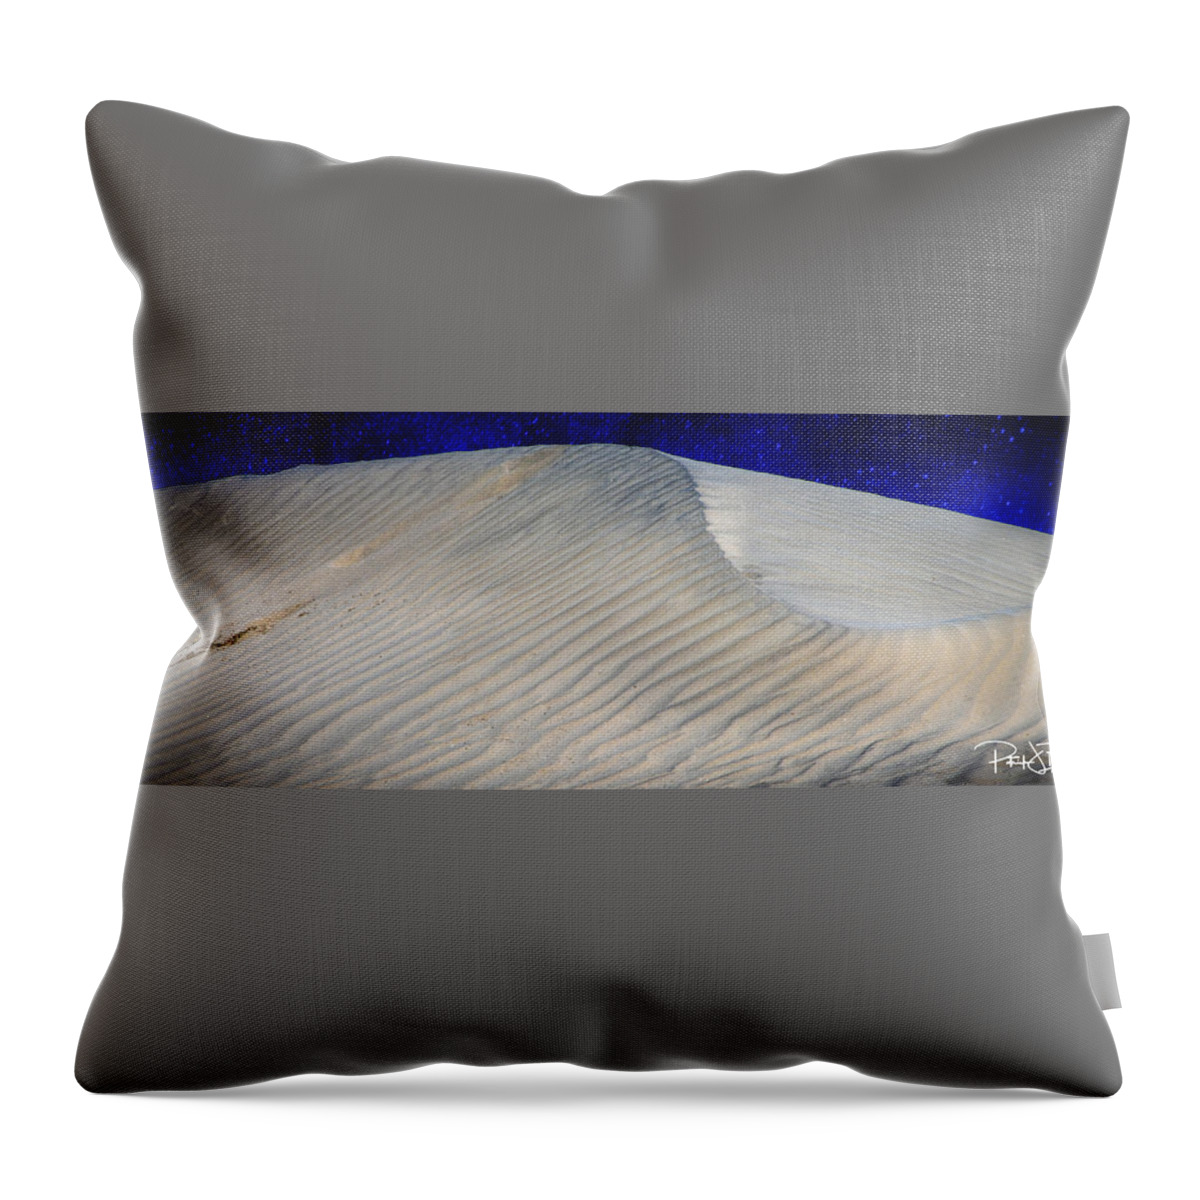 Desert Throw Pillow featuring the photograph Sand Dunes by Patrick Boening